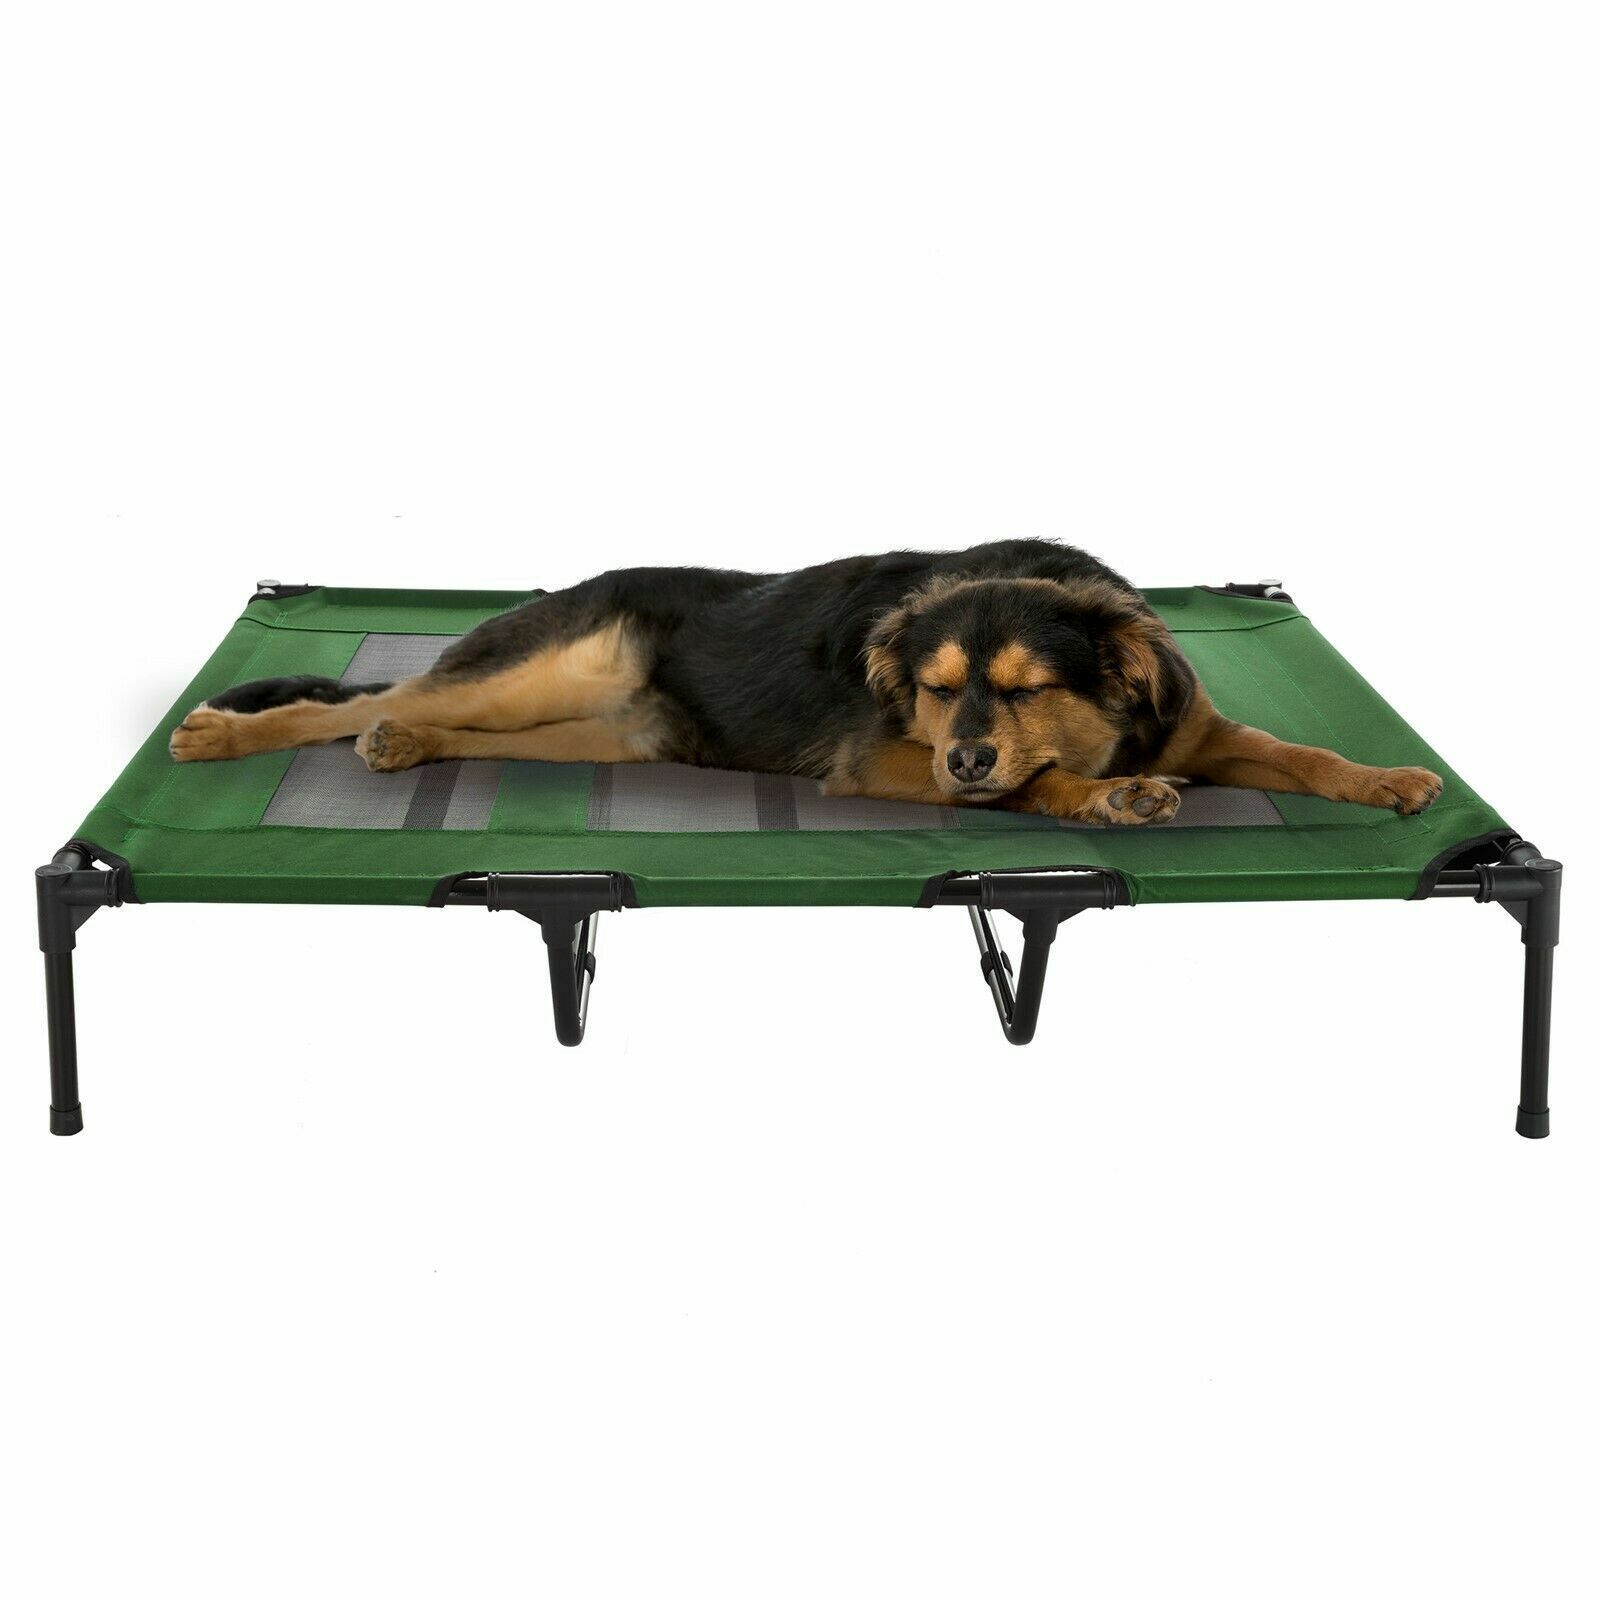 Primary image for XL Dog Bed Indoor Outdoor Raised Elevated Cot and Travel Case 48 x 35 In